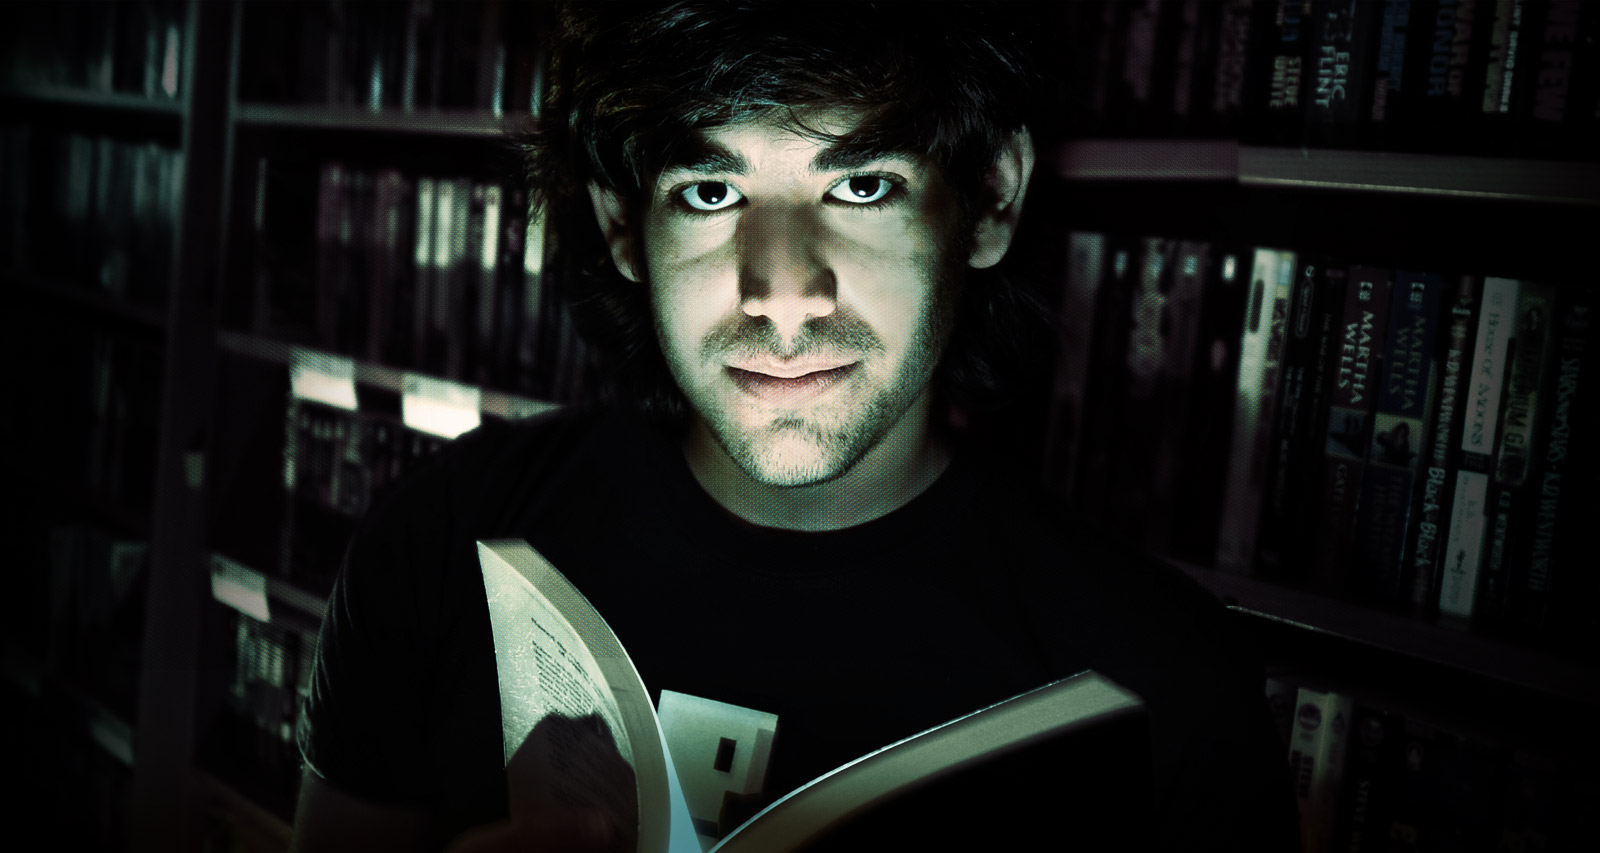 The Internet's boy: the story of Aaron Swartz